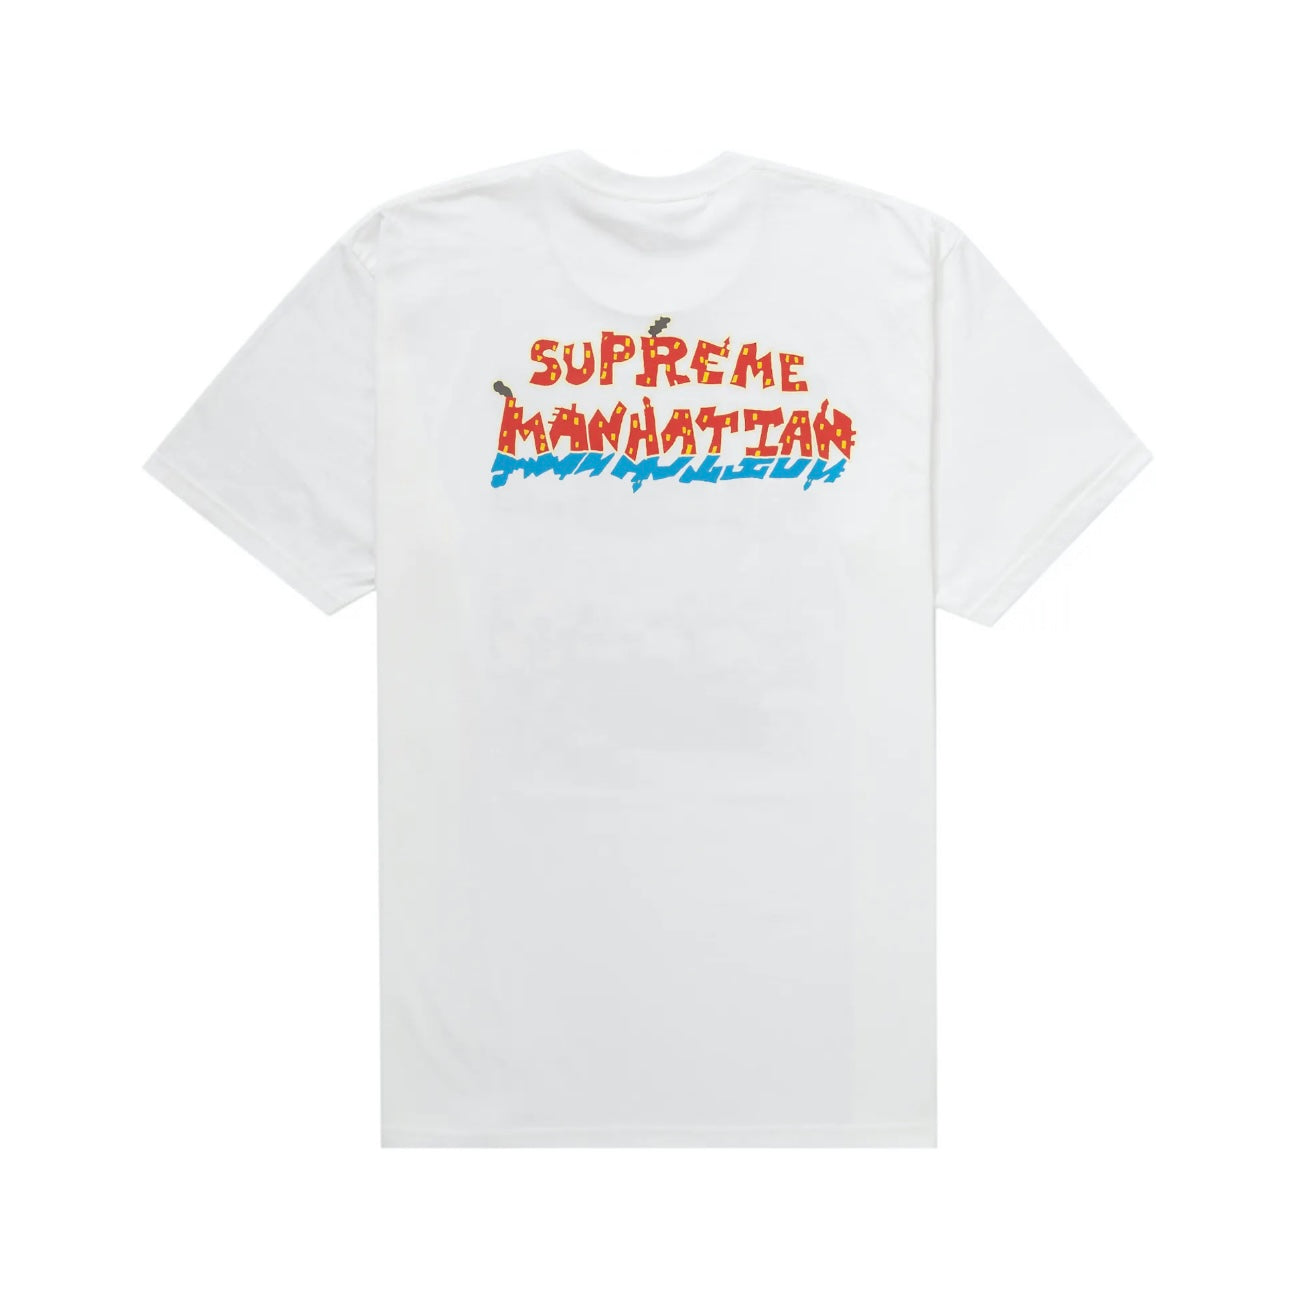 Supreme Summer 2020 T-Shirt Collection